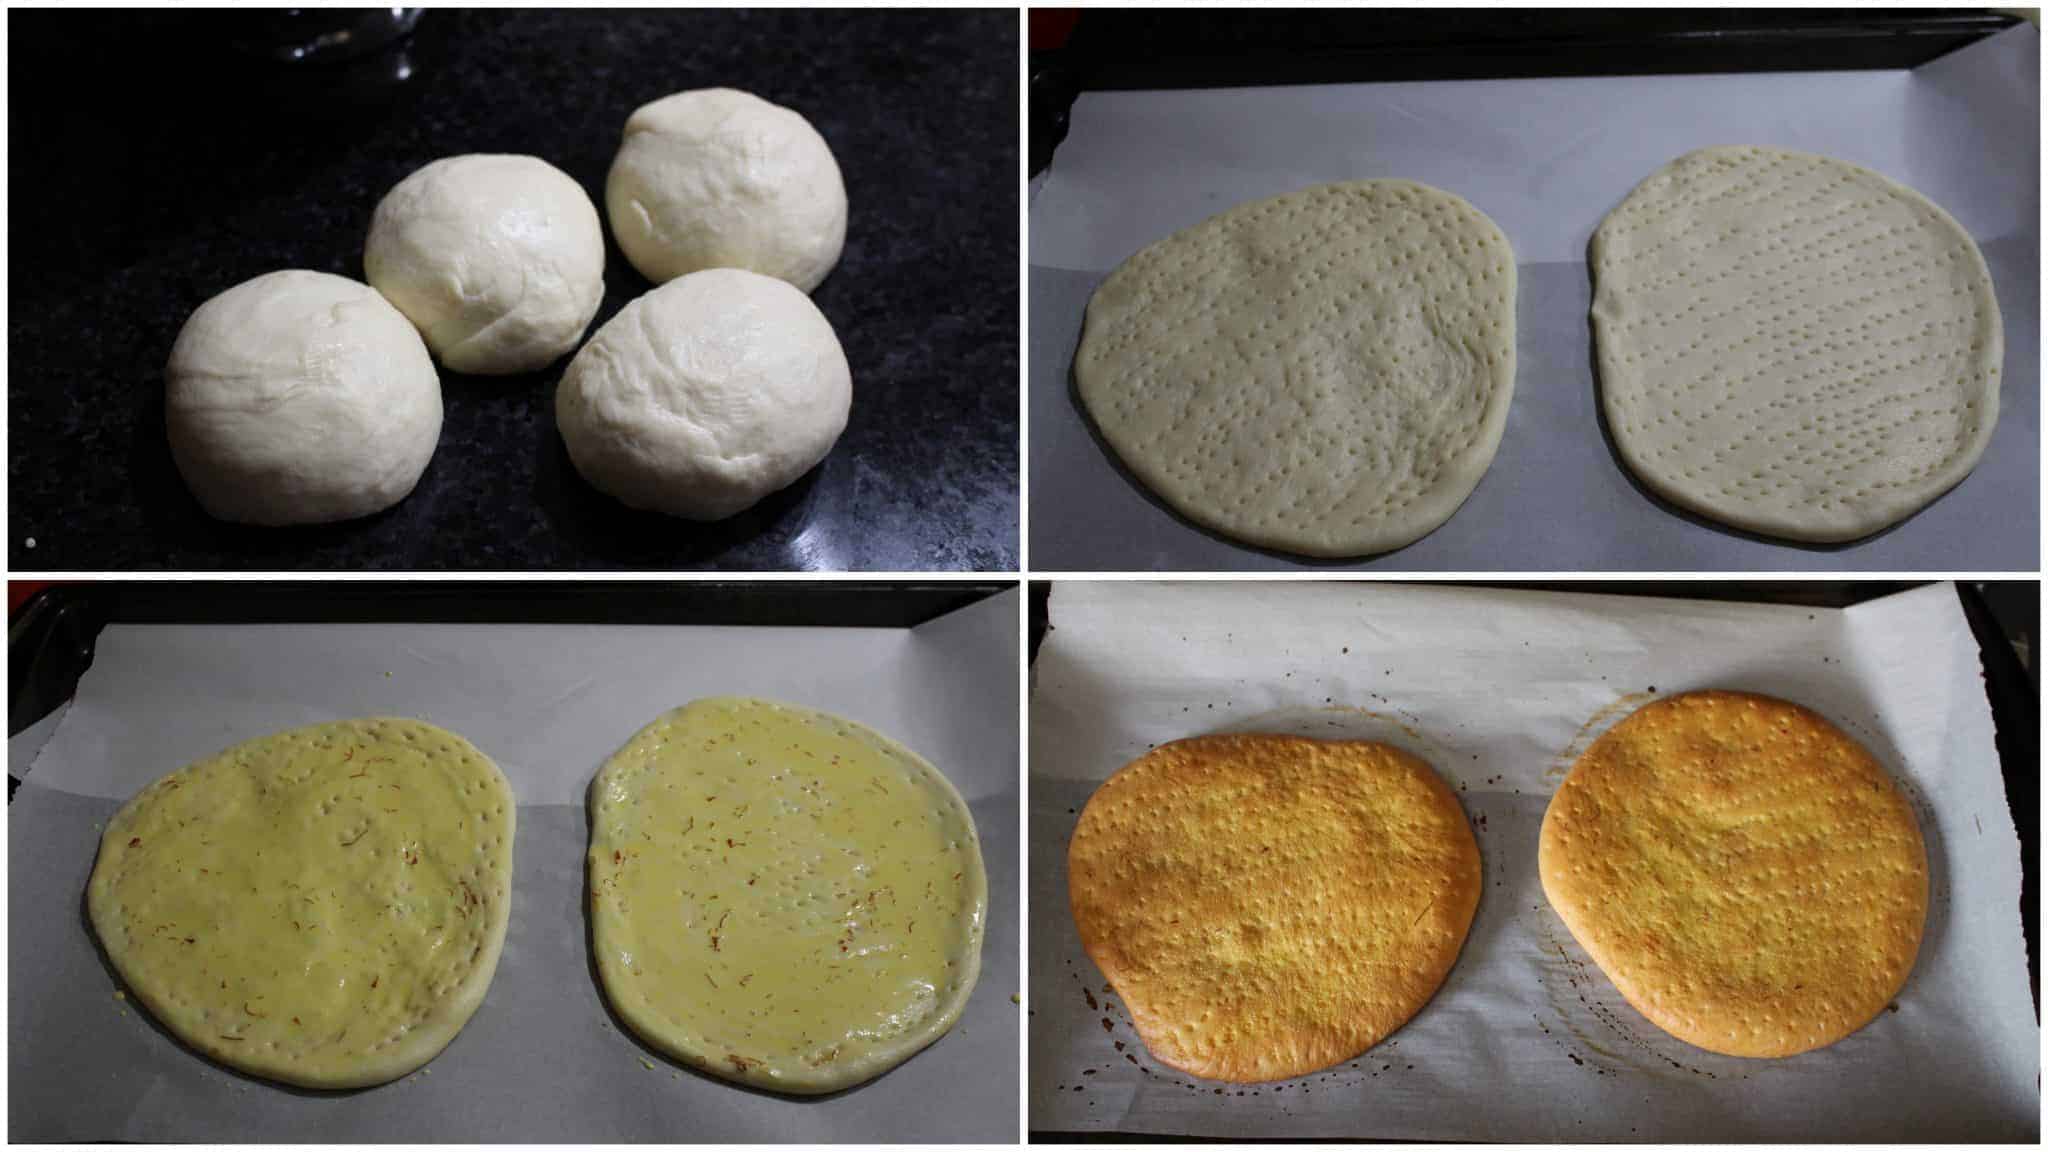 shaping and Baking the sheermal in a oven